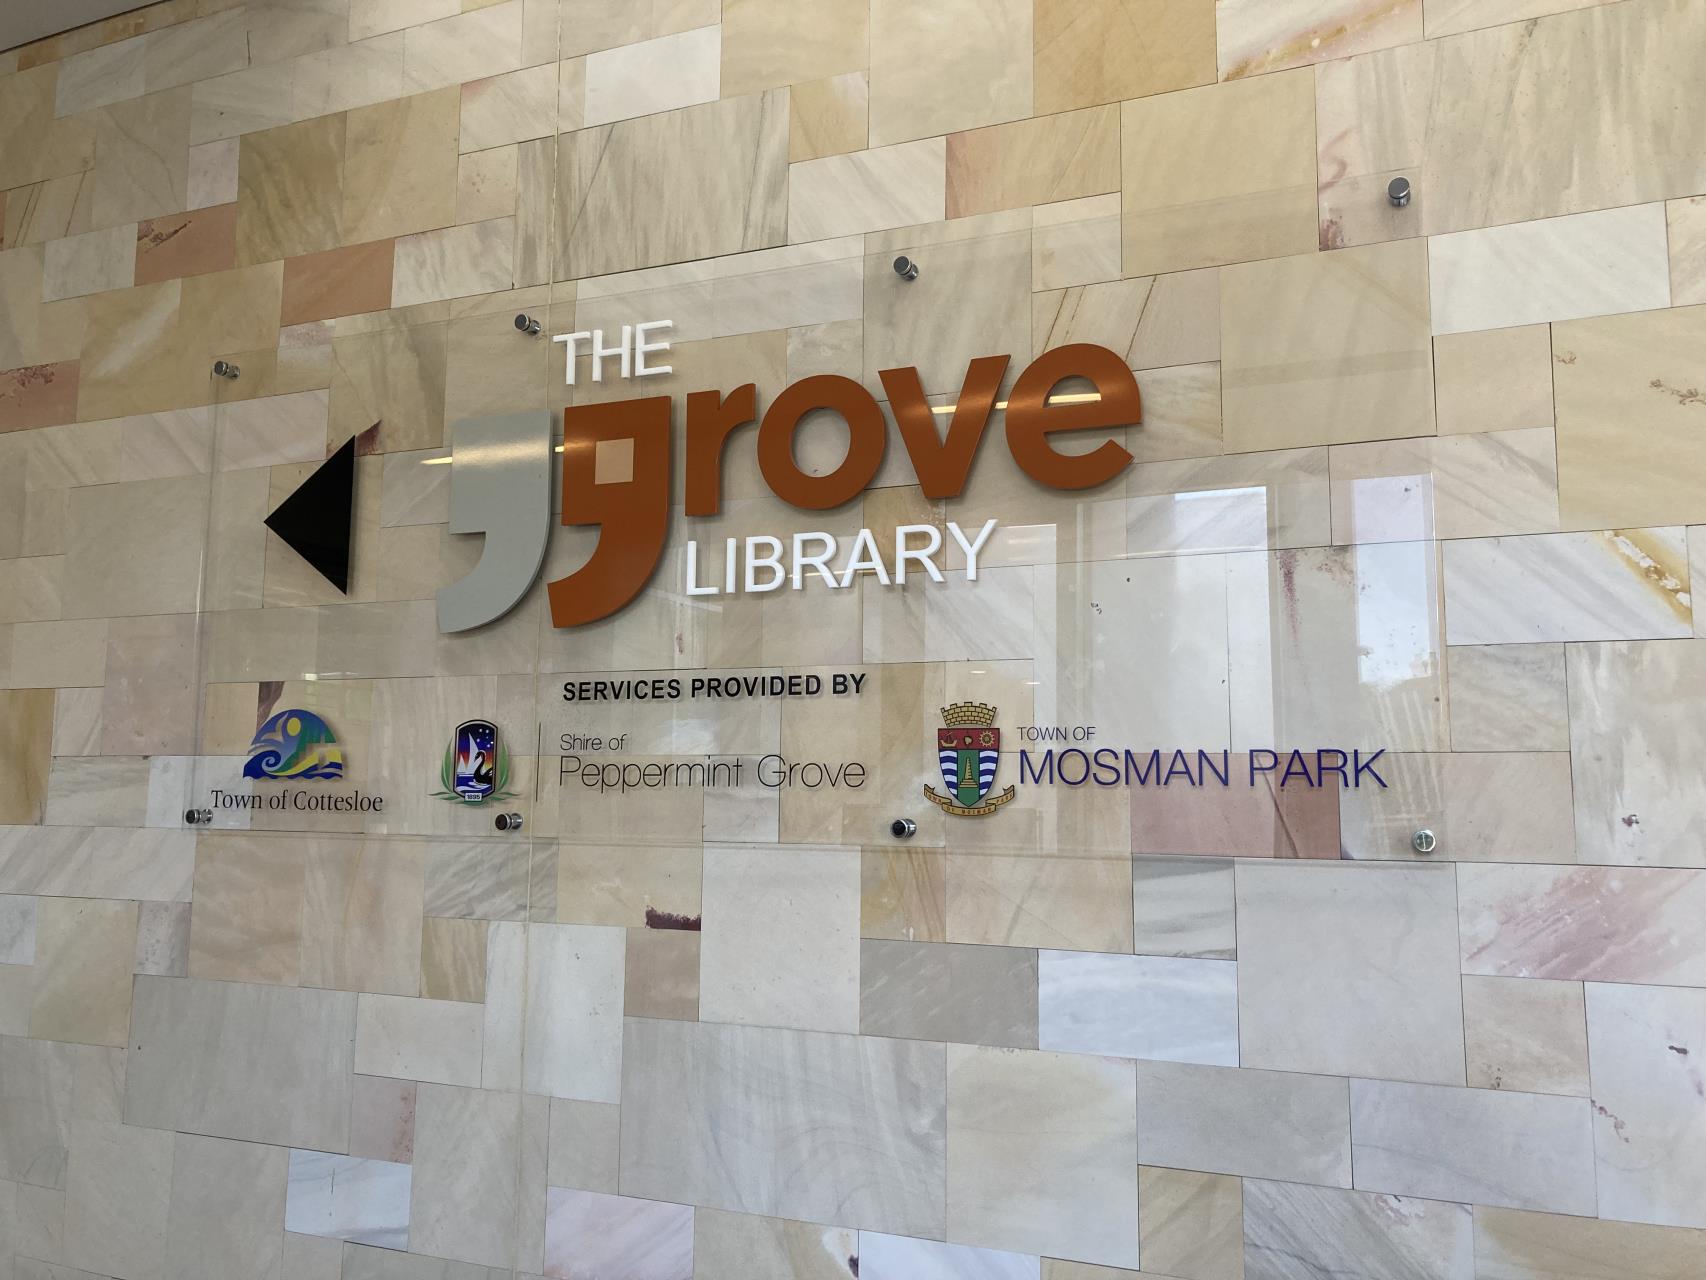 The Grove Library Image